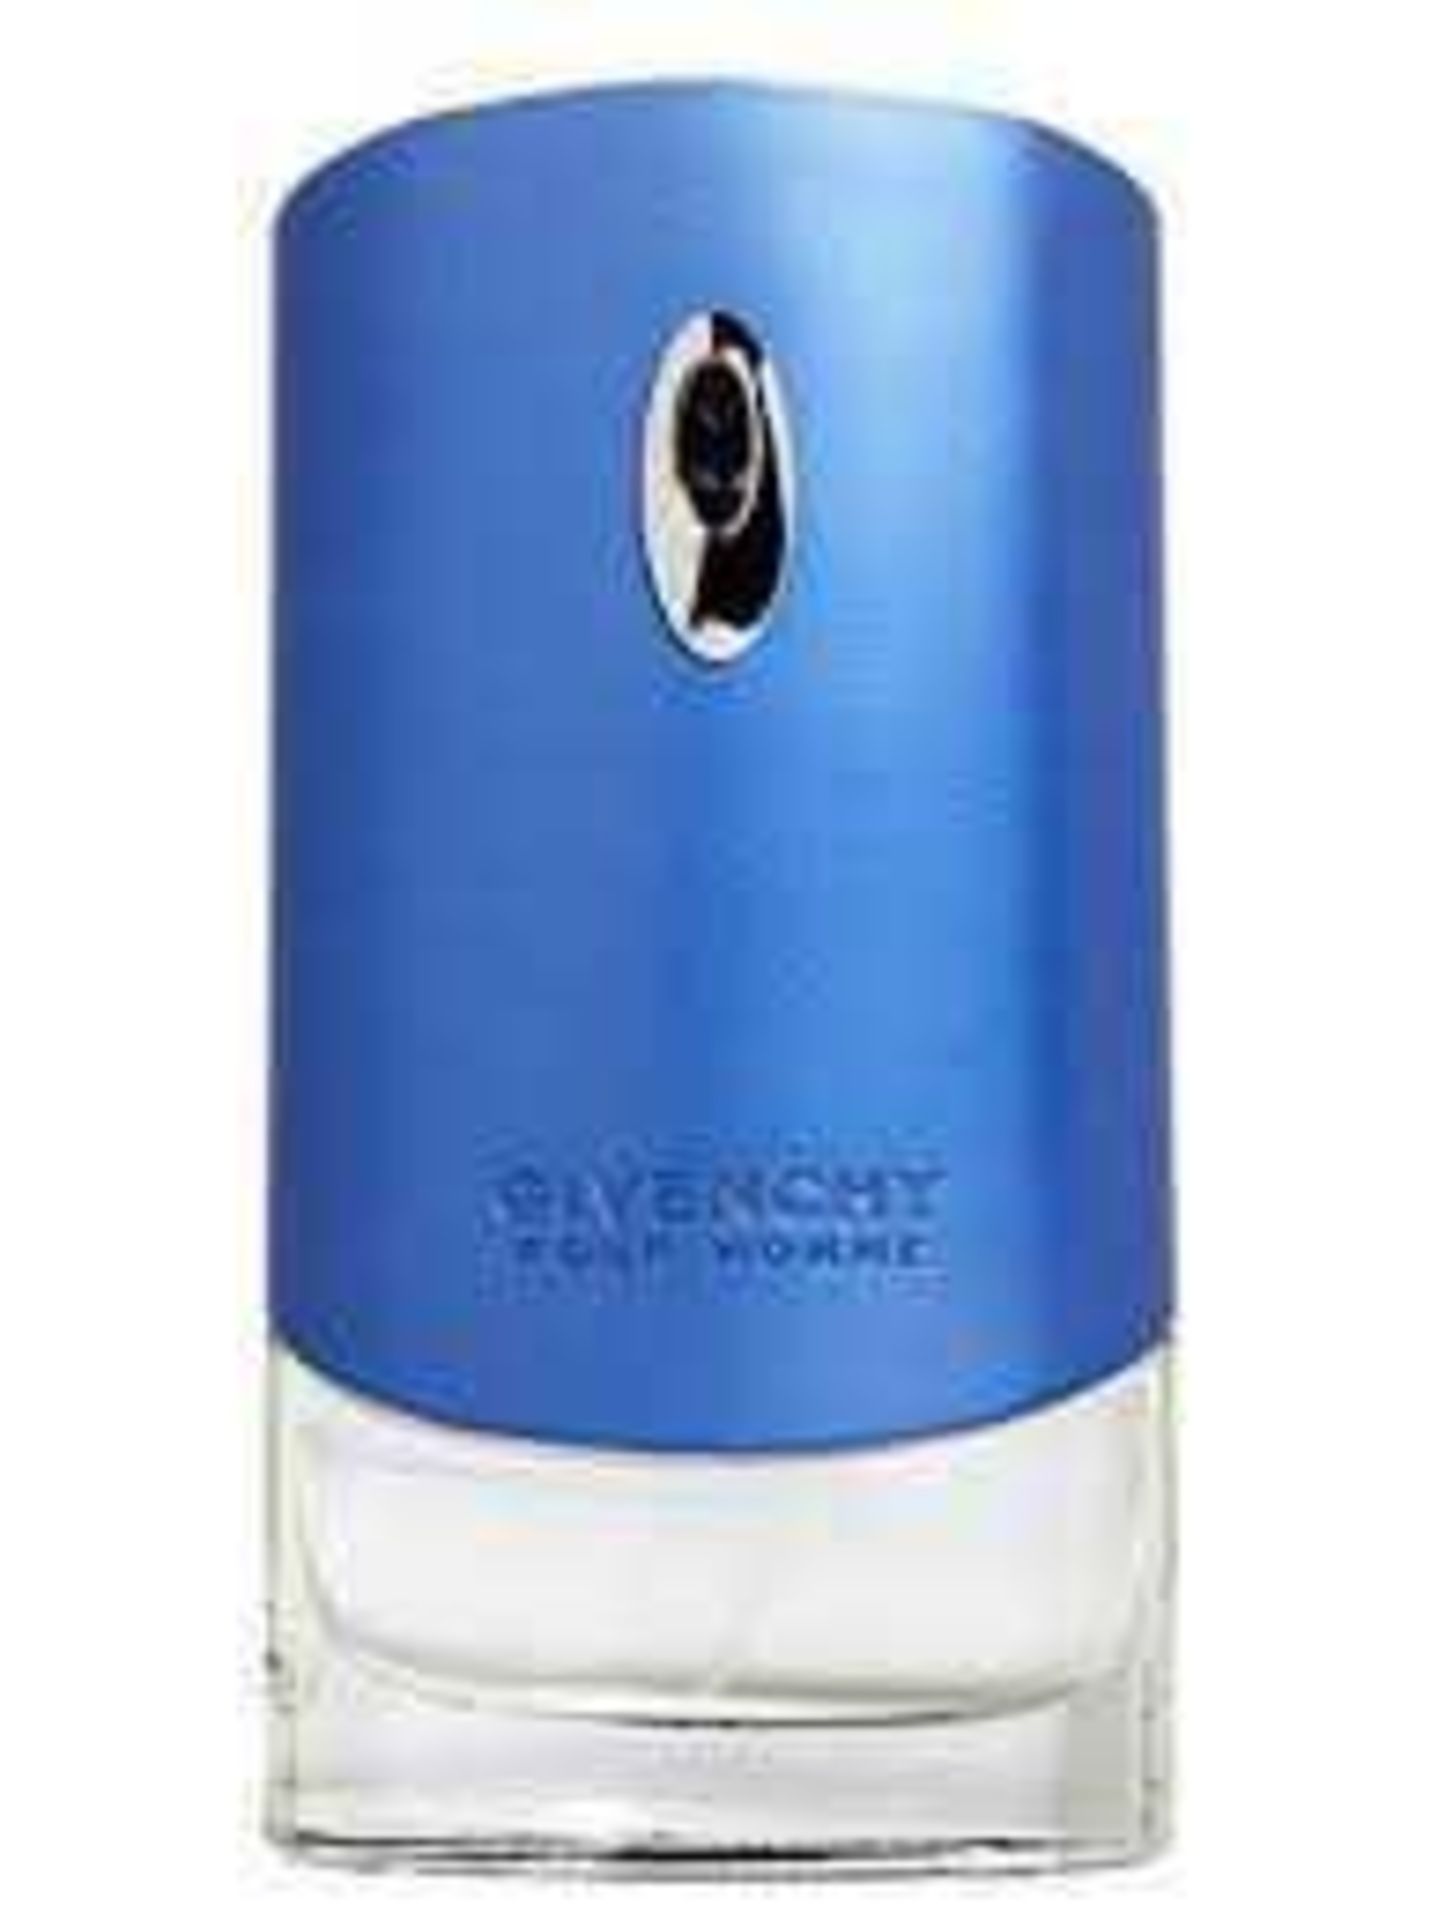 RRP £70 Brand New Boxed Full 50Ml Tester Bottle Of Givenchy Blue Label Edt Spray